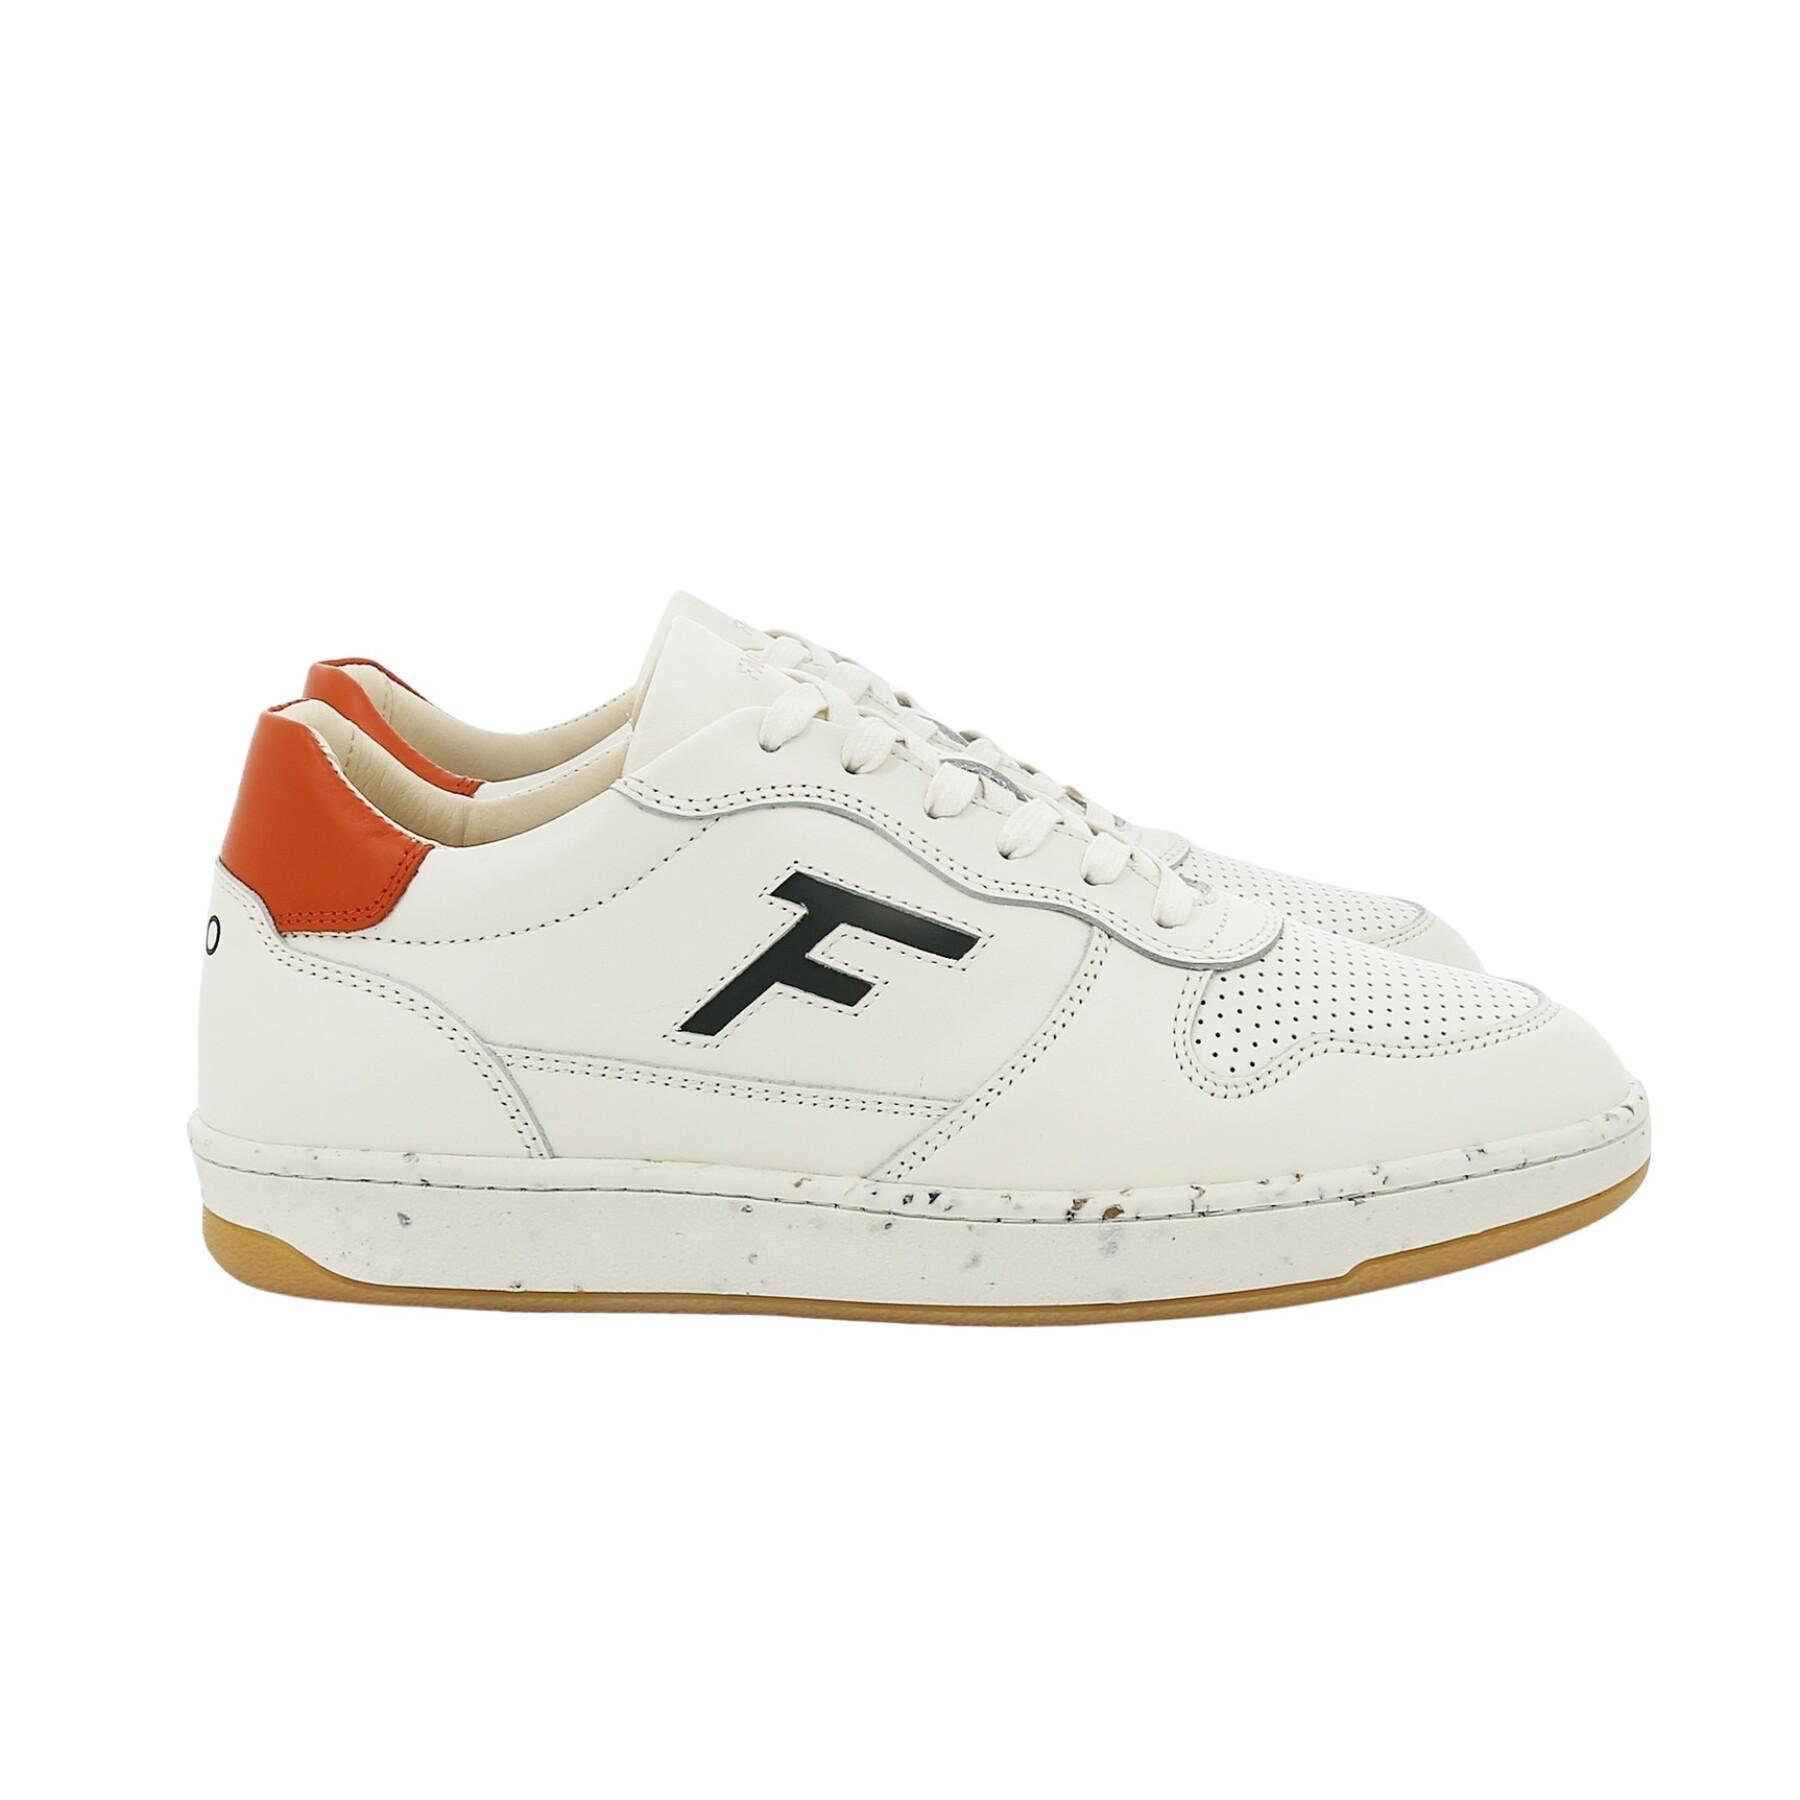 Sneakers Faguo Alder Leather